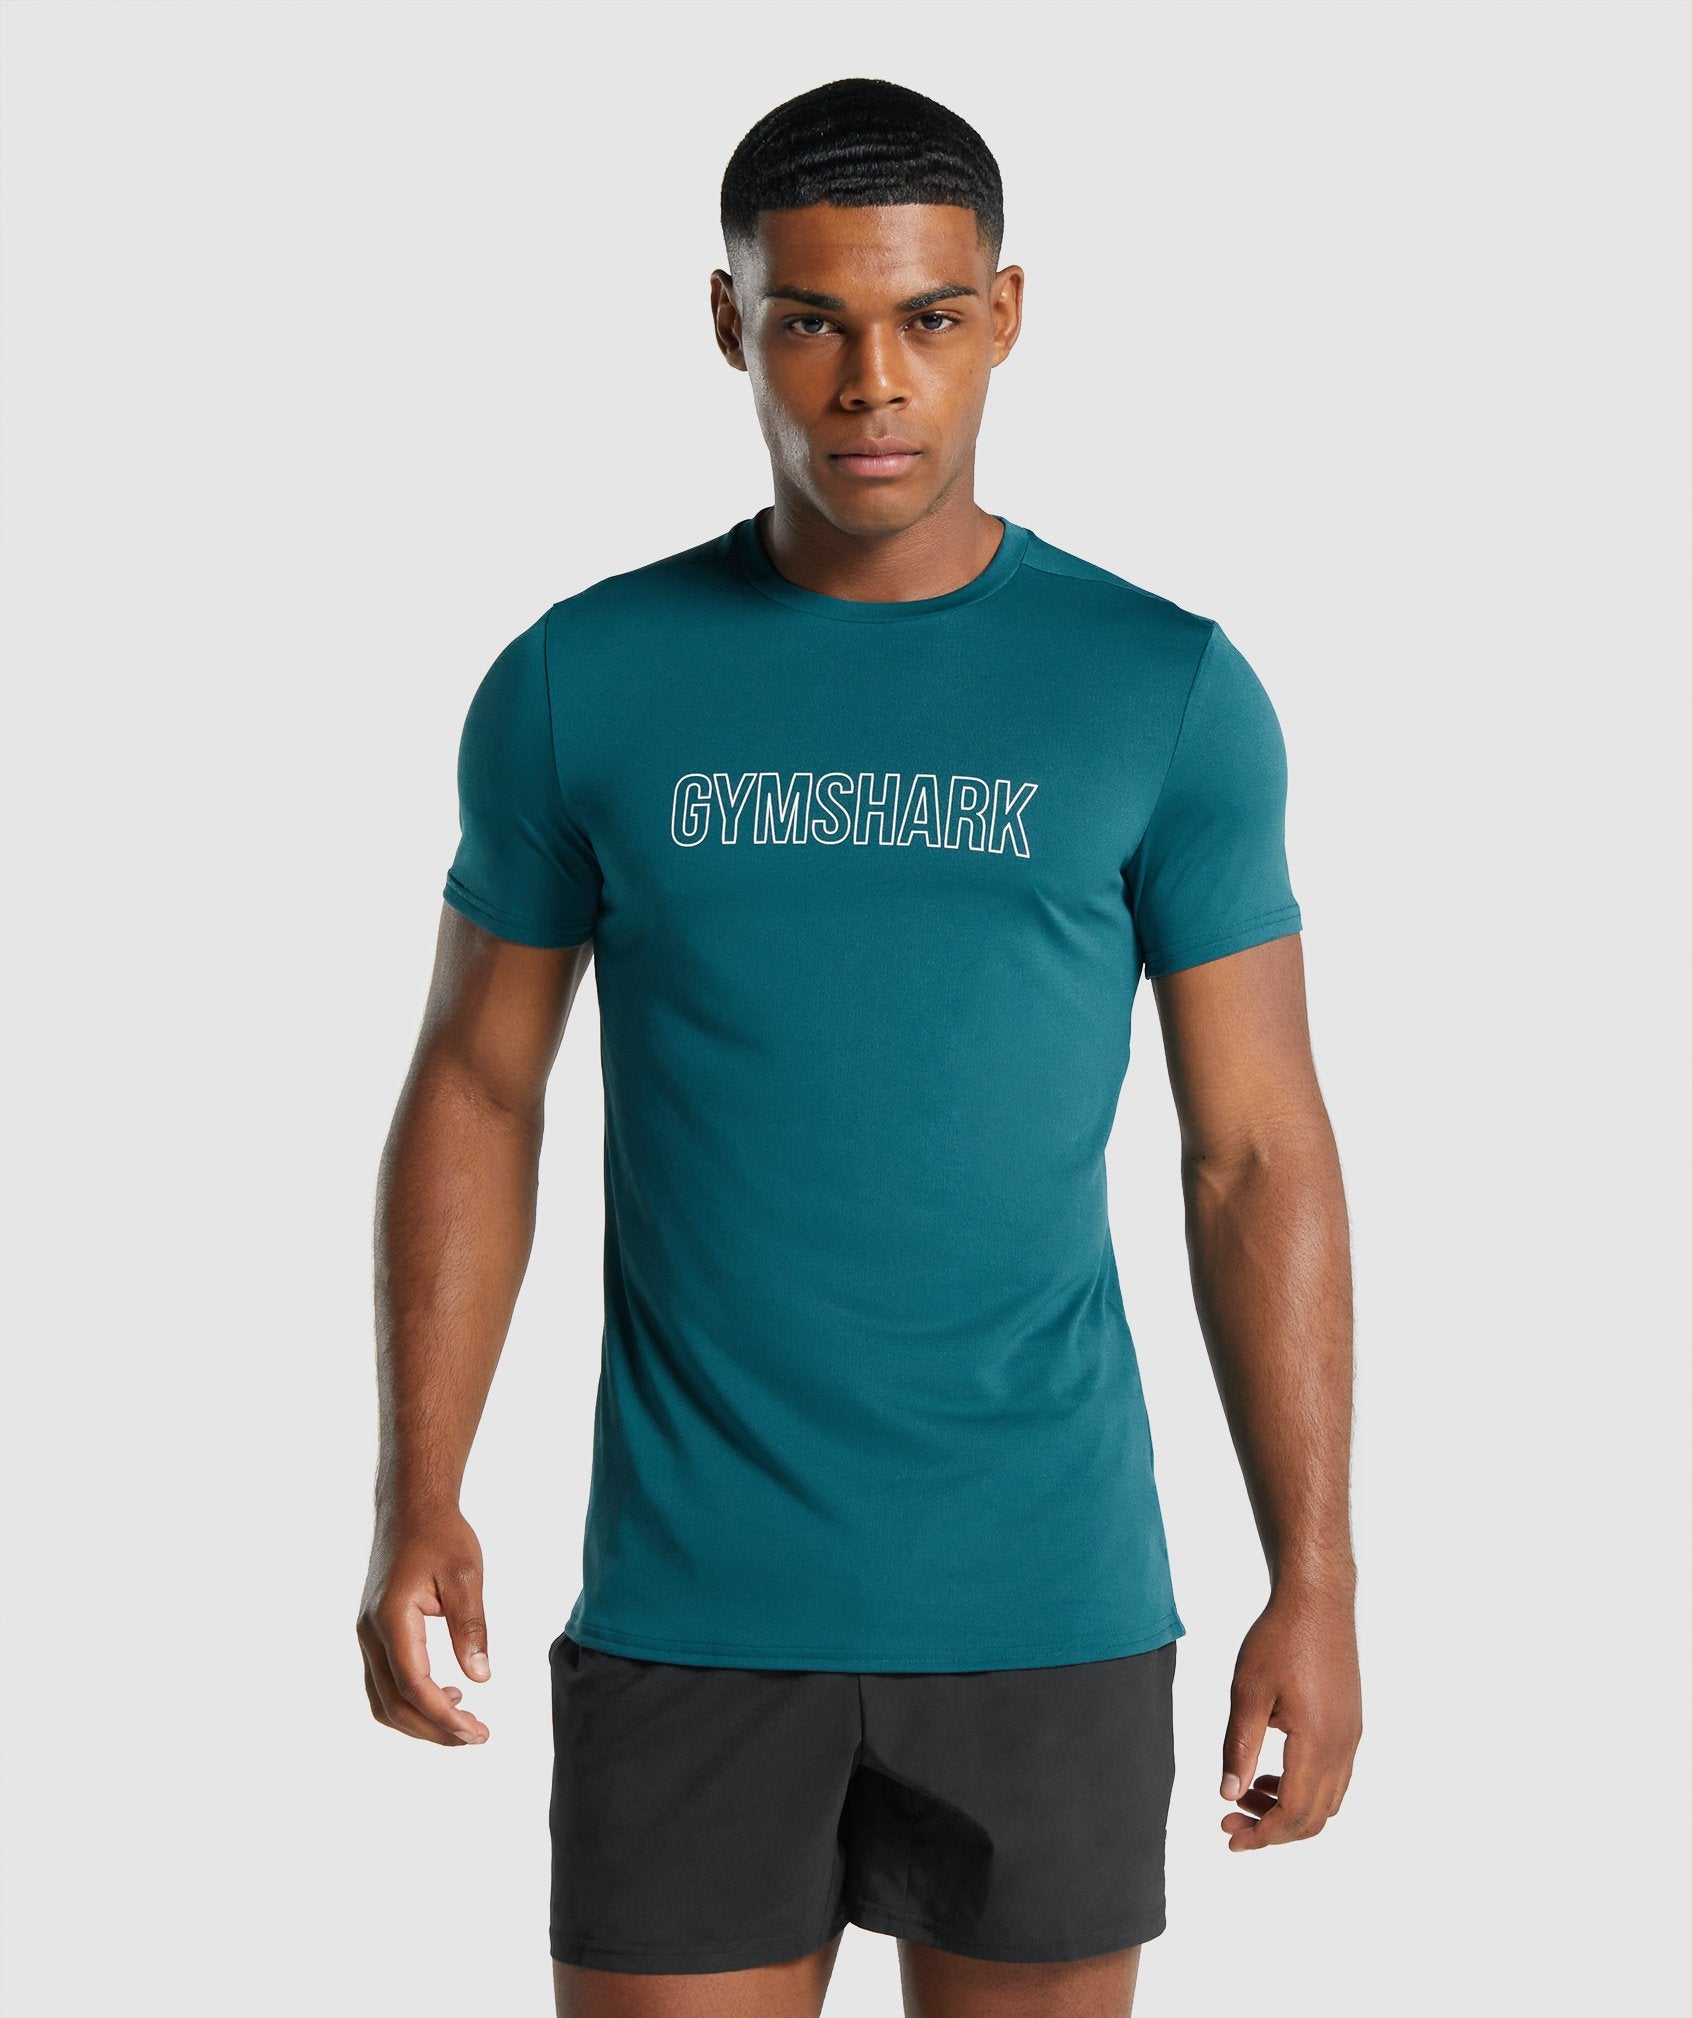 Arrival Graphic T-Shirt in Teal - view 1